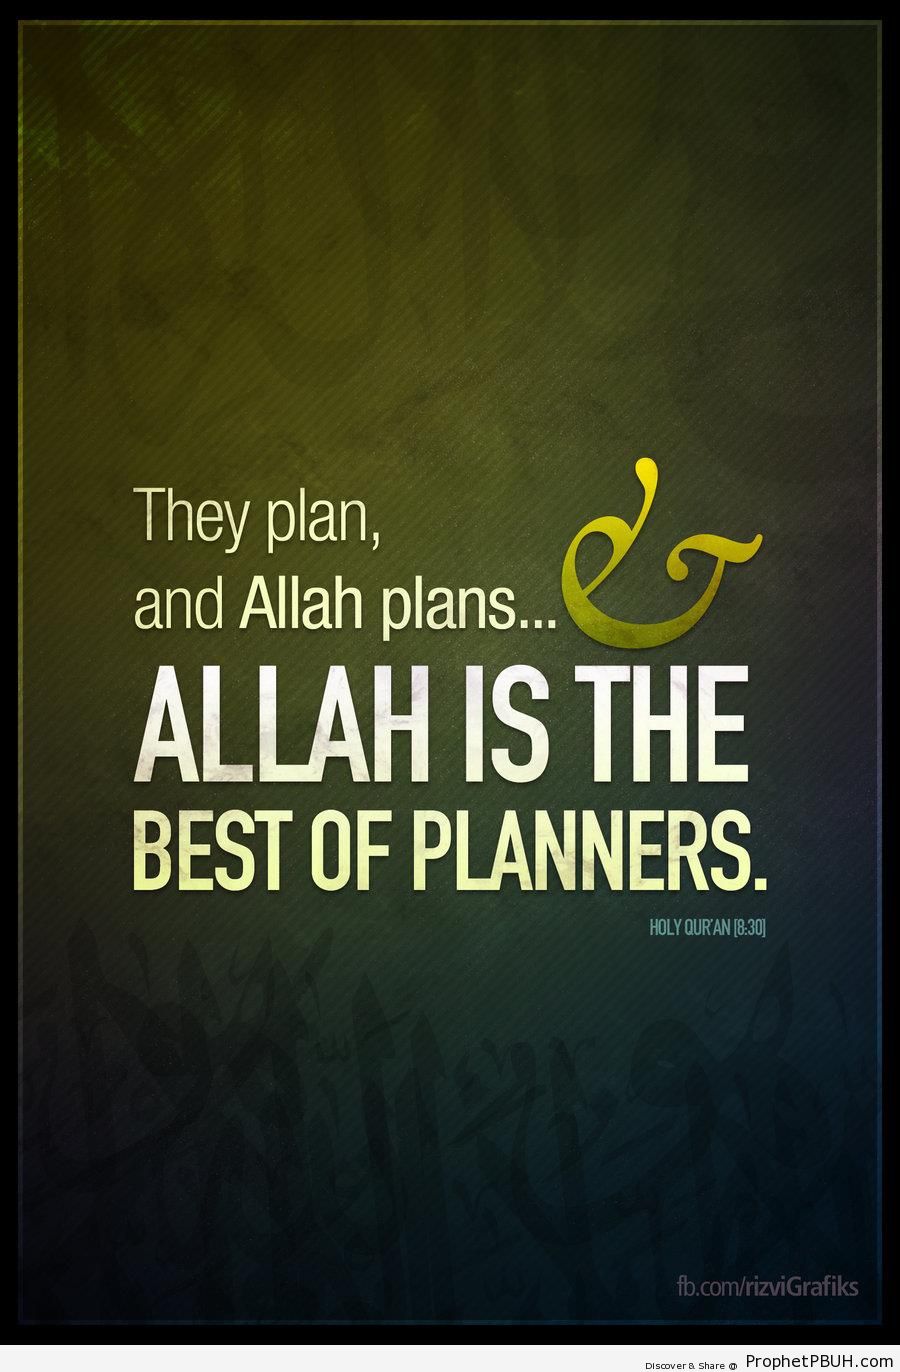 The Best of Planners (Quran 8-30) - Islamic Calligraphy and Typography 